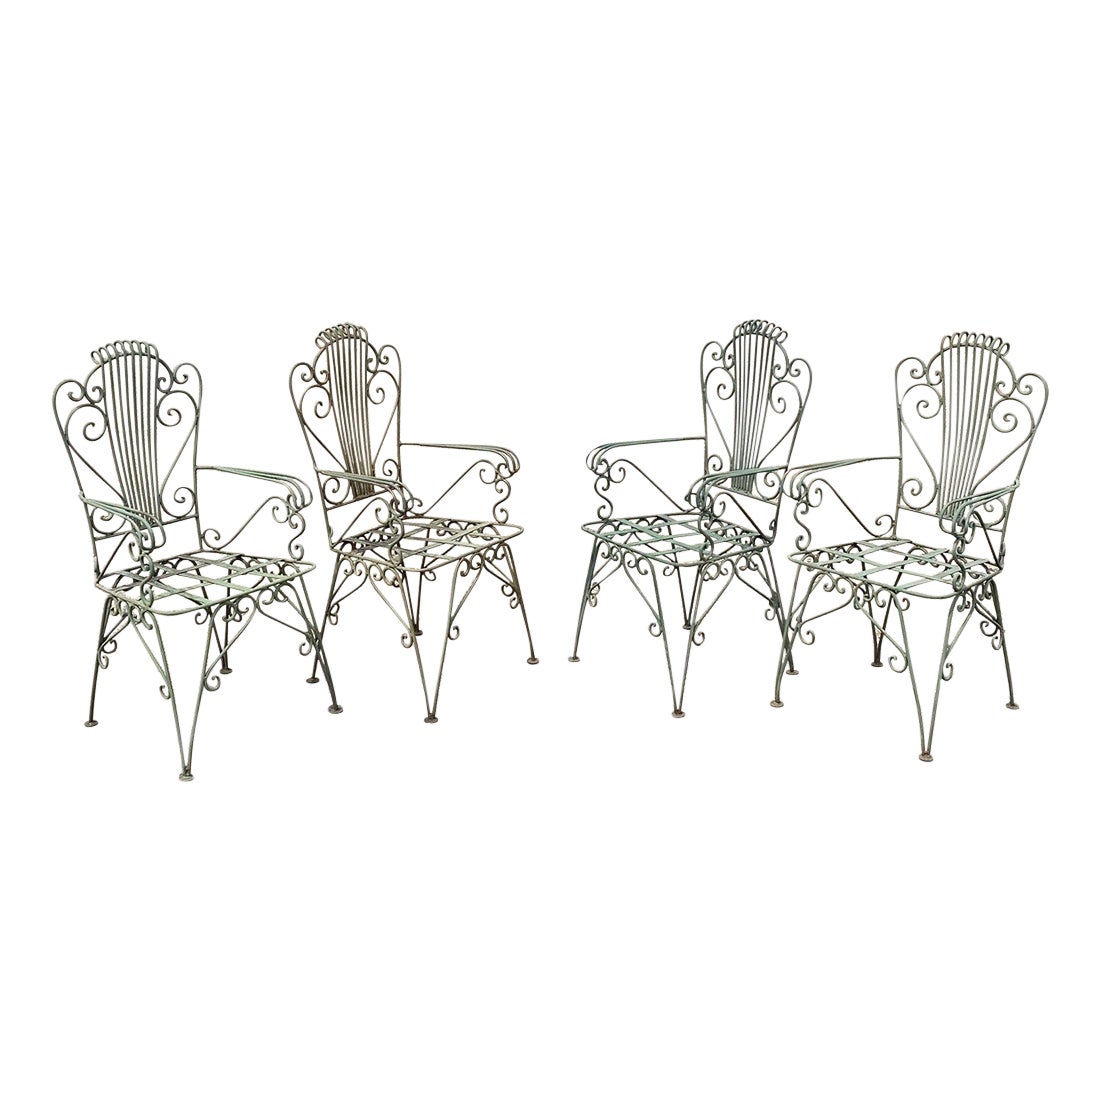 Vintage Neoclassical Style Green Wrought Iron Lyre Harp Garden Chairs - Set of 4 For Sale